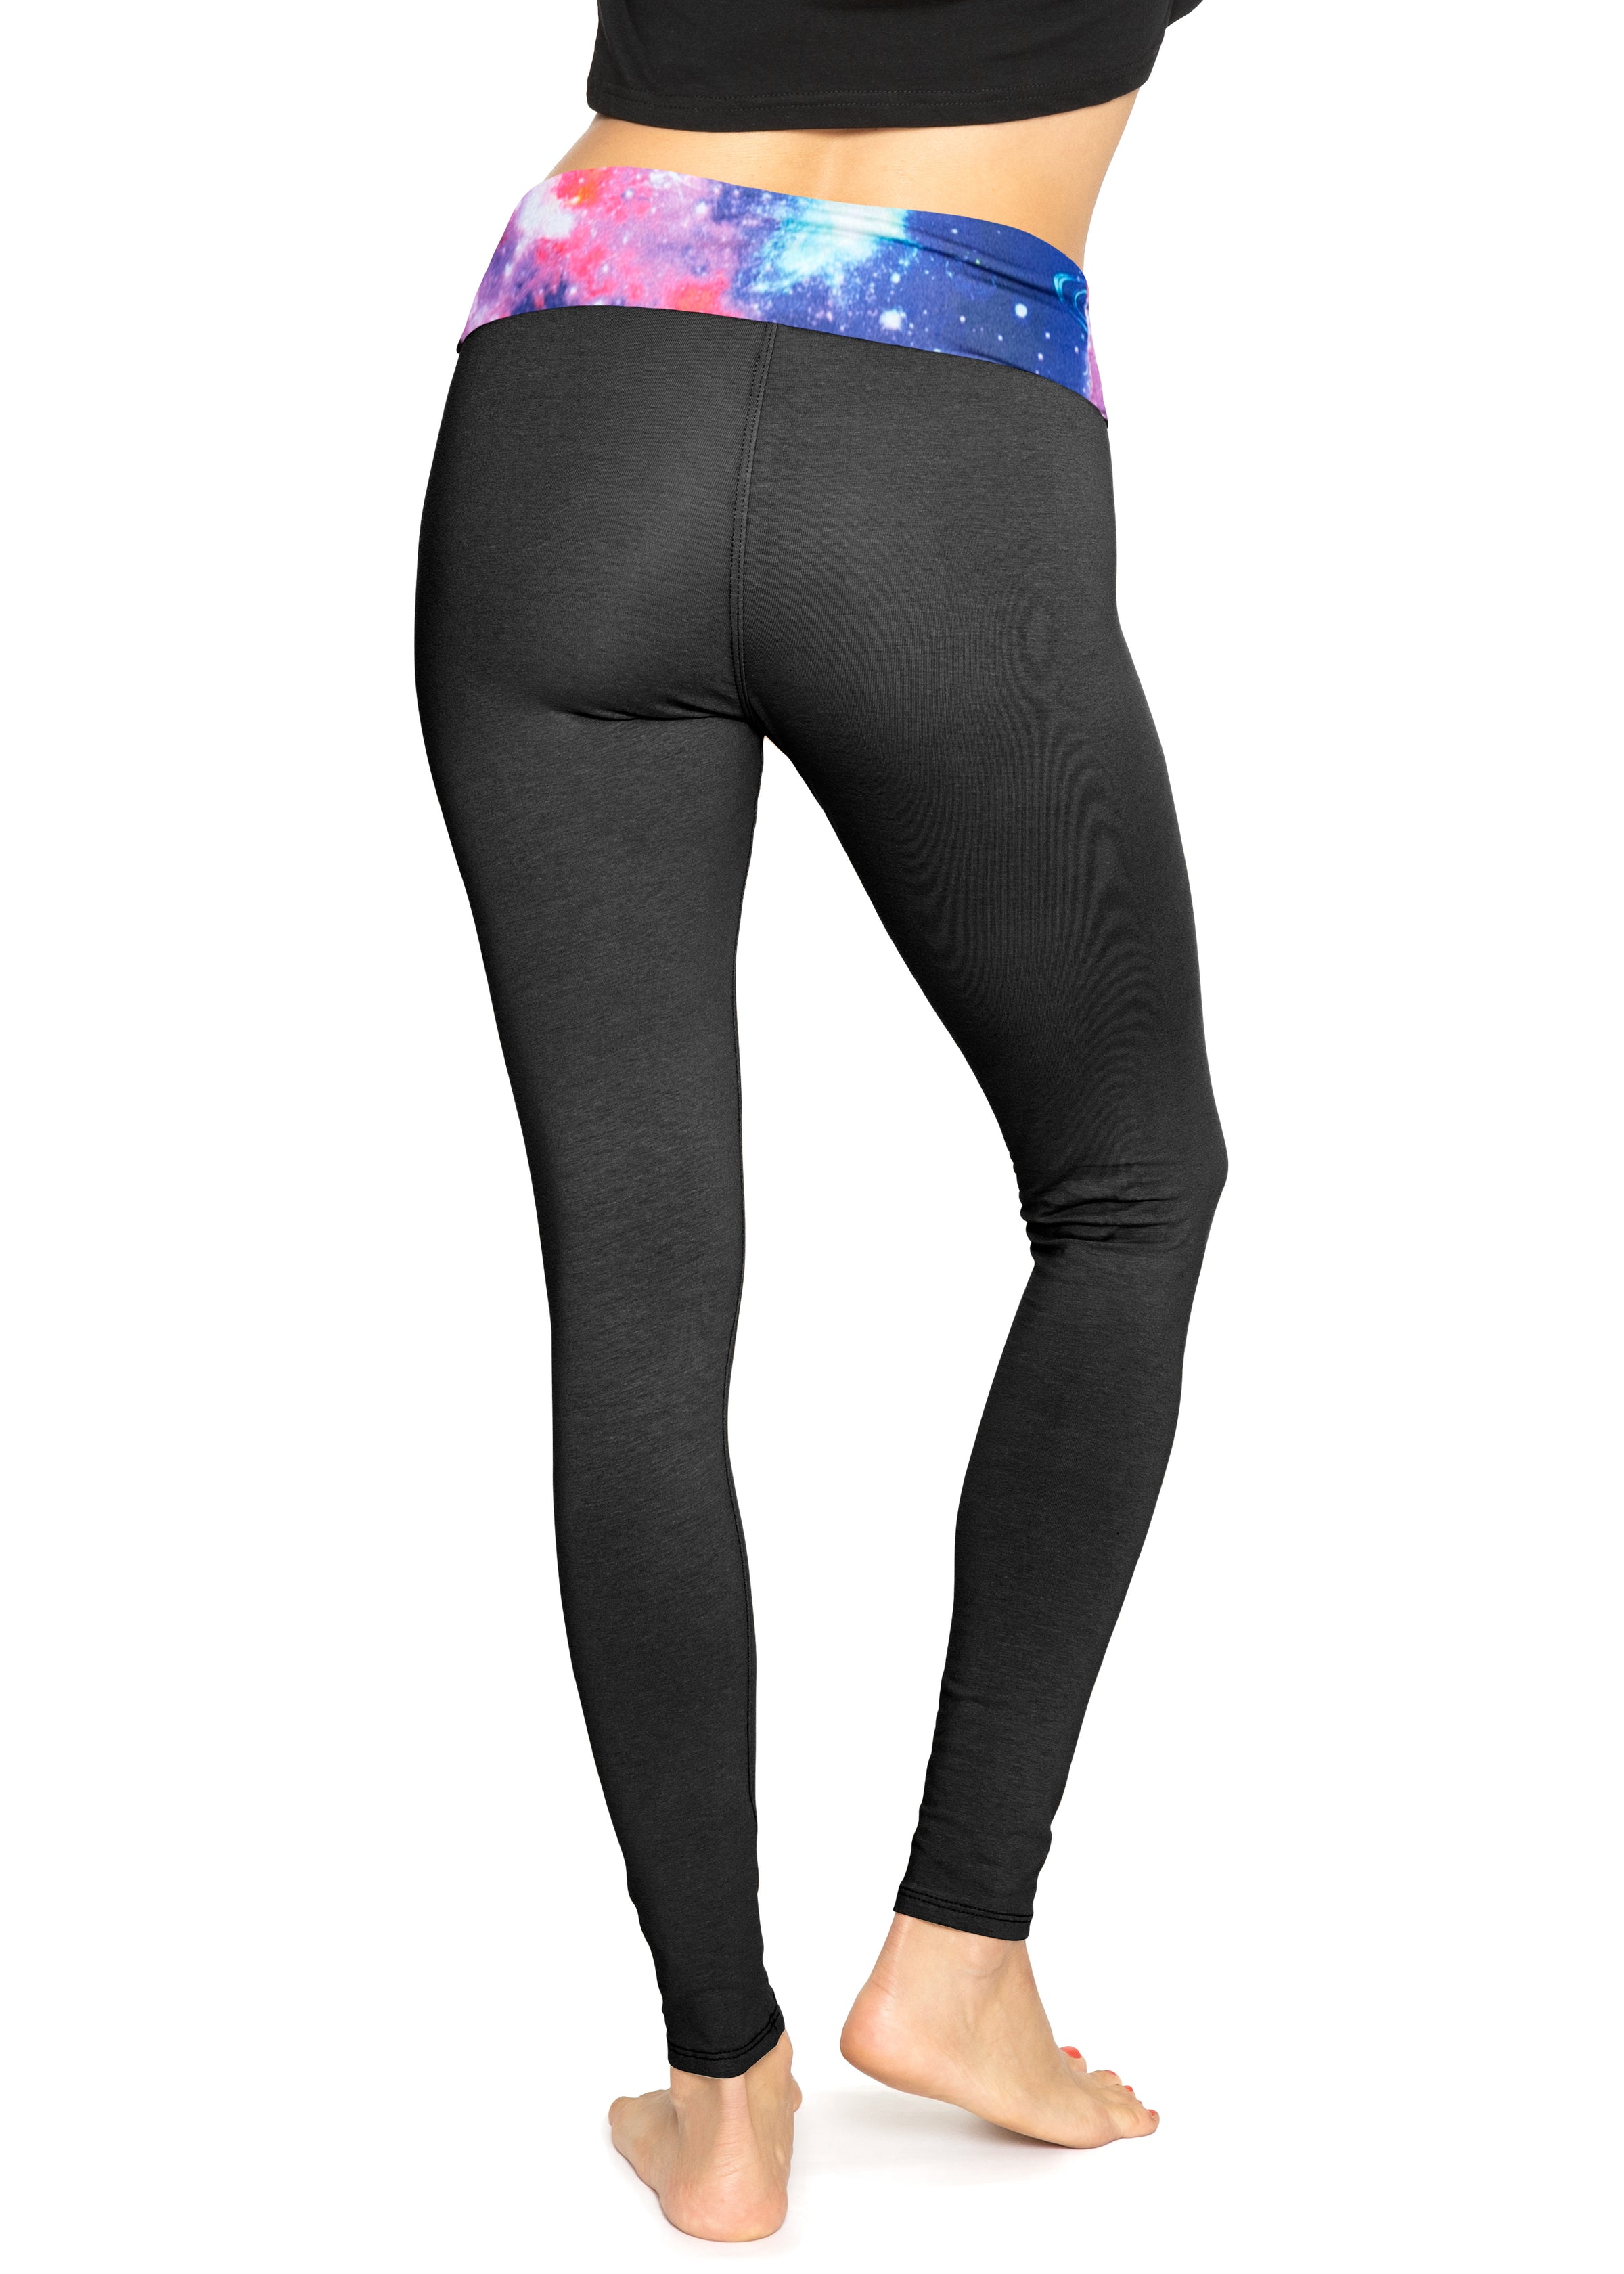 Stretch Is Comfort Women's Cotton Leggings| Adult Small-5x